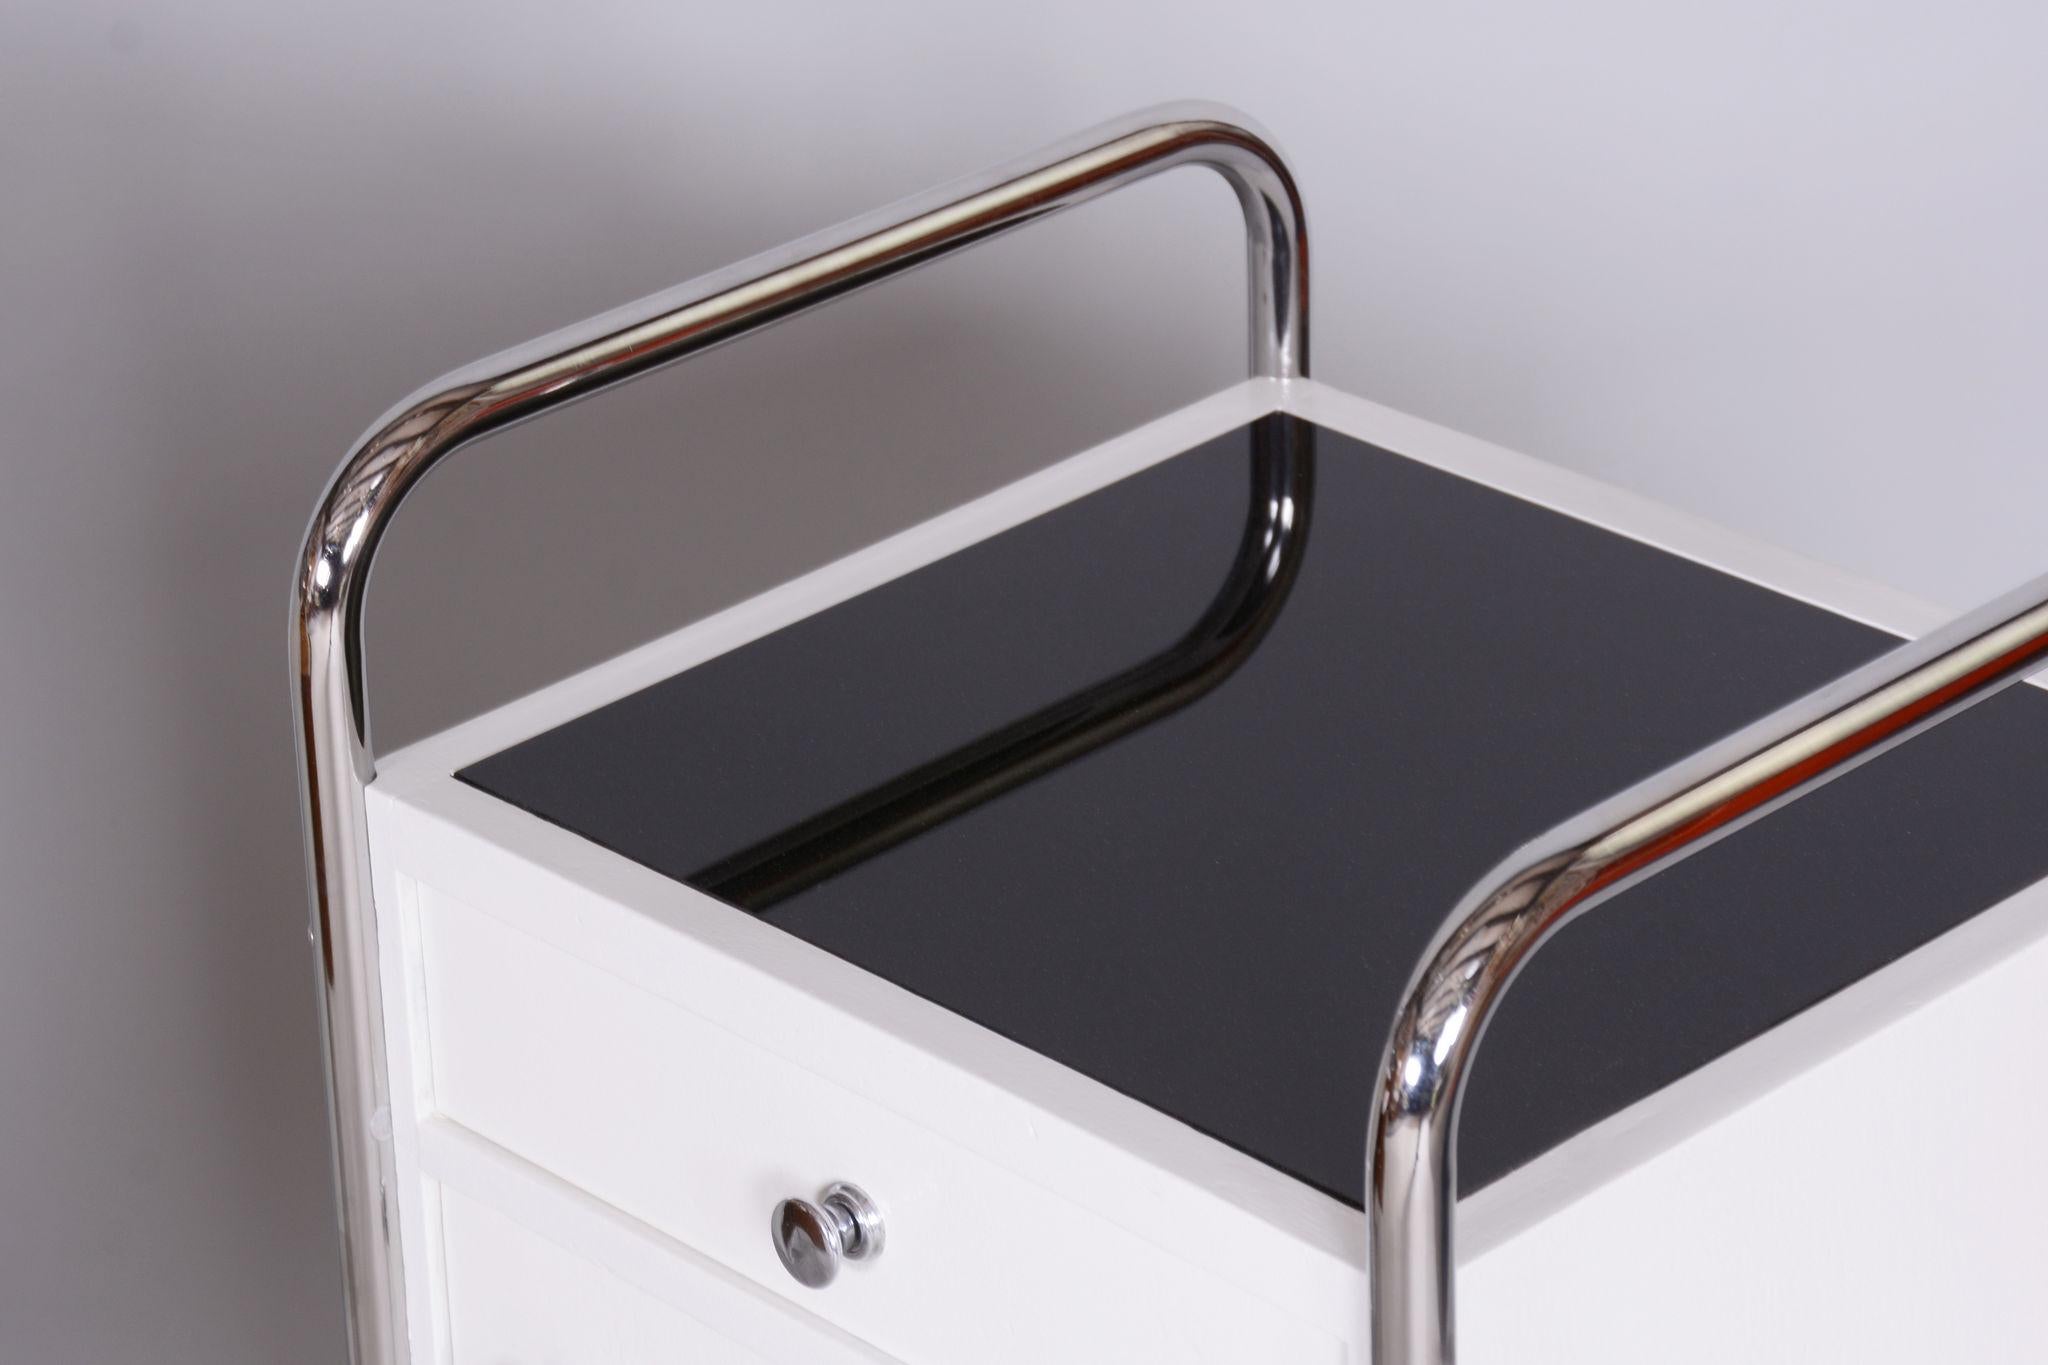 Restored Bauhaus Pair of Bedside Tables Made by Vichr a spol.

Period: 1930-1939
Maker: Vichr a spol.
Source: Czechia (Czechoslovakia)
Material: Chrome-Plated Steel, Lacquered Wood, Black Glass

The chrome parts have been cleaned and professionally